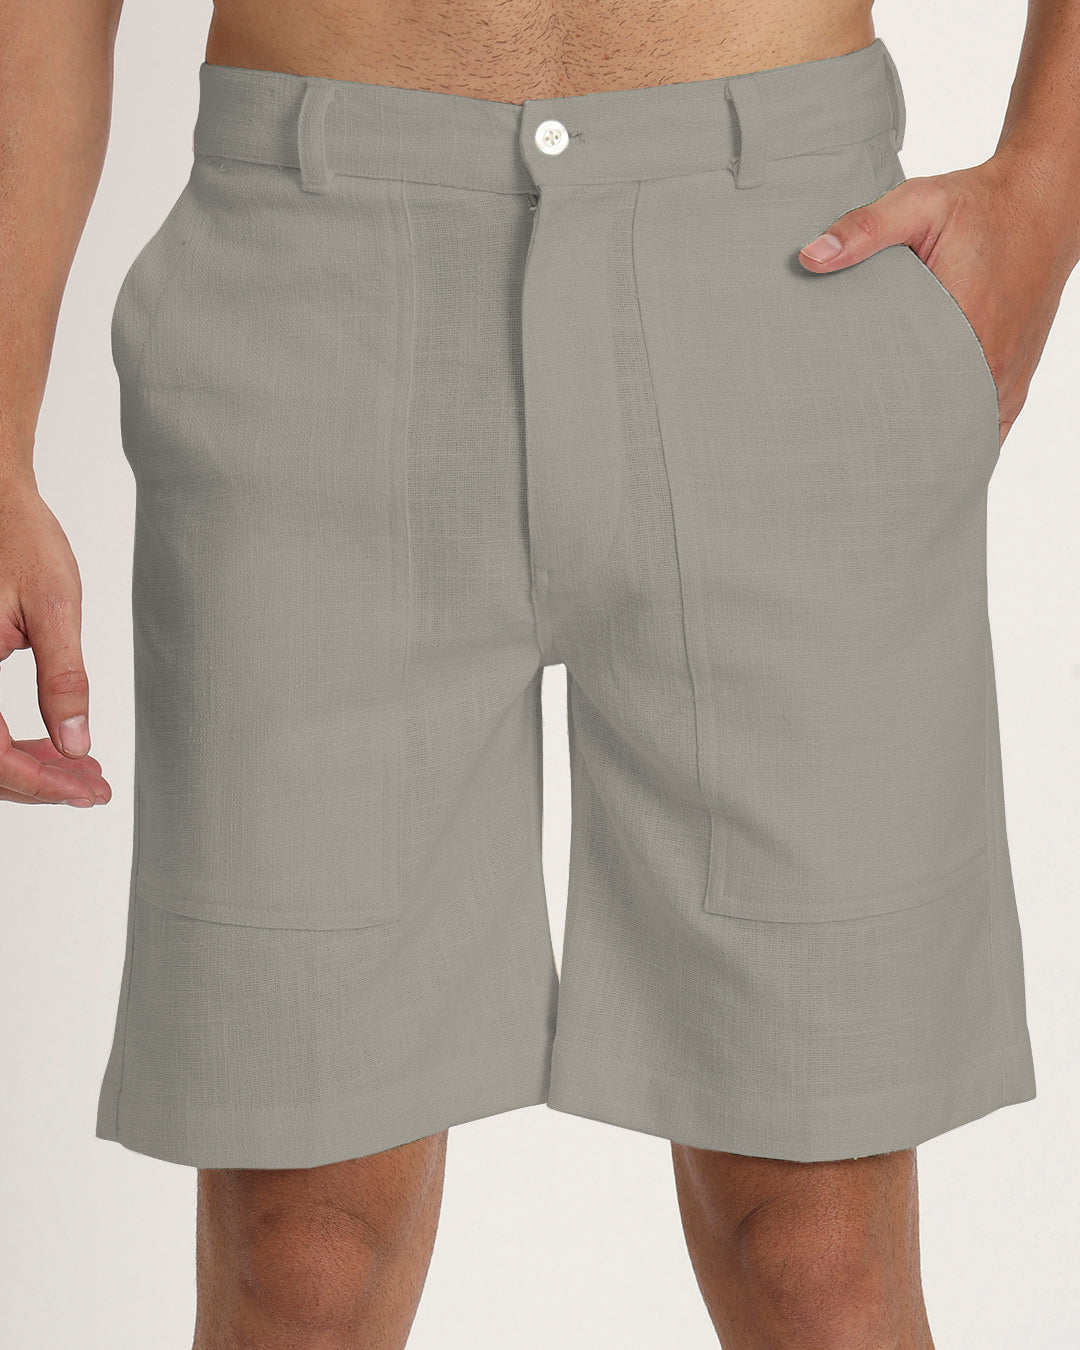 Patch Pocket Playtime Iced Grey Men's Shorts